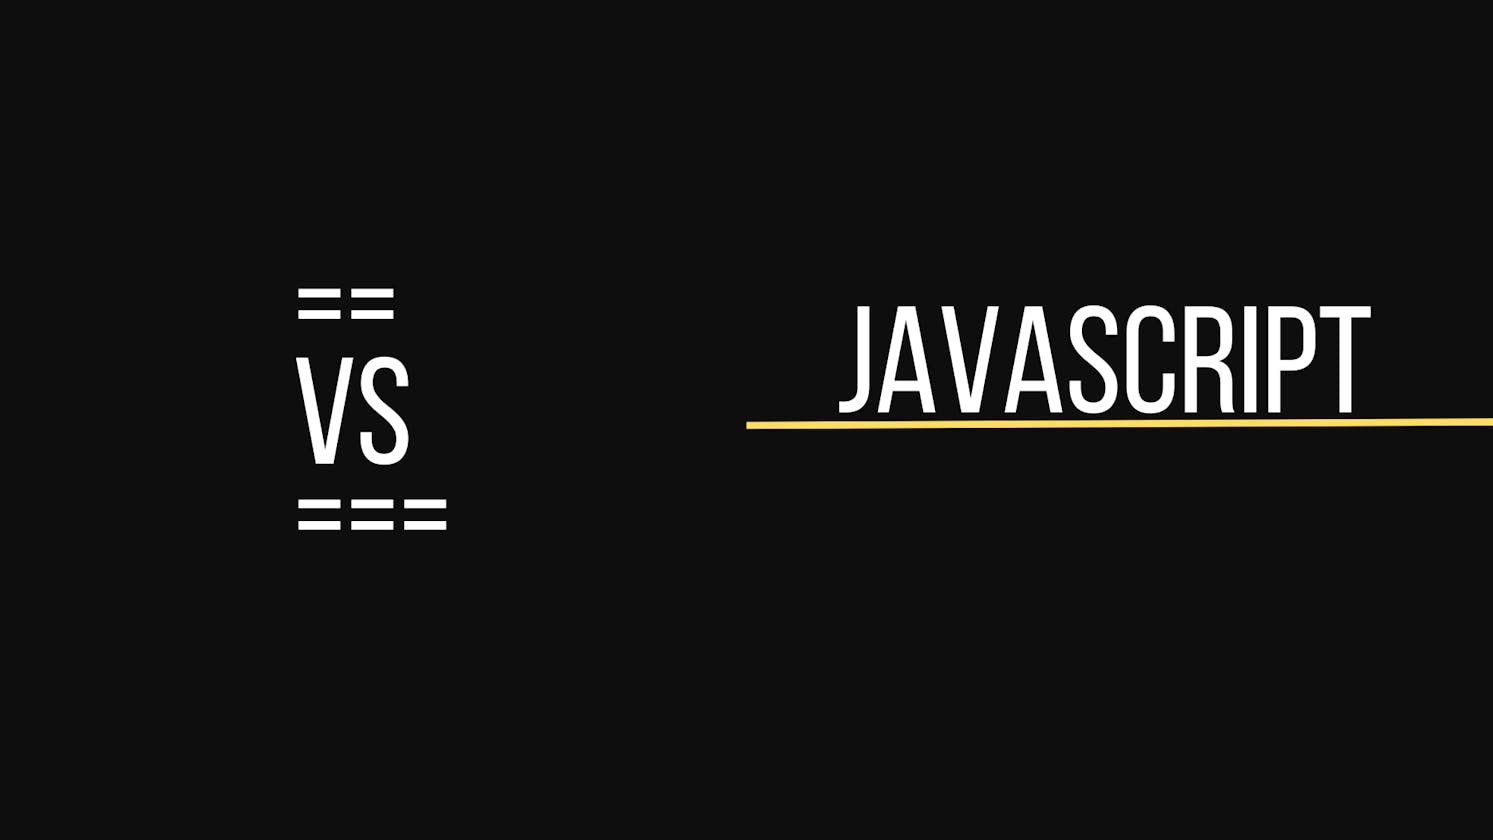 Making the Right Choice: "===" vs "==" in JavaScript